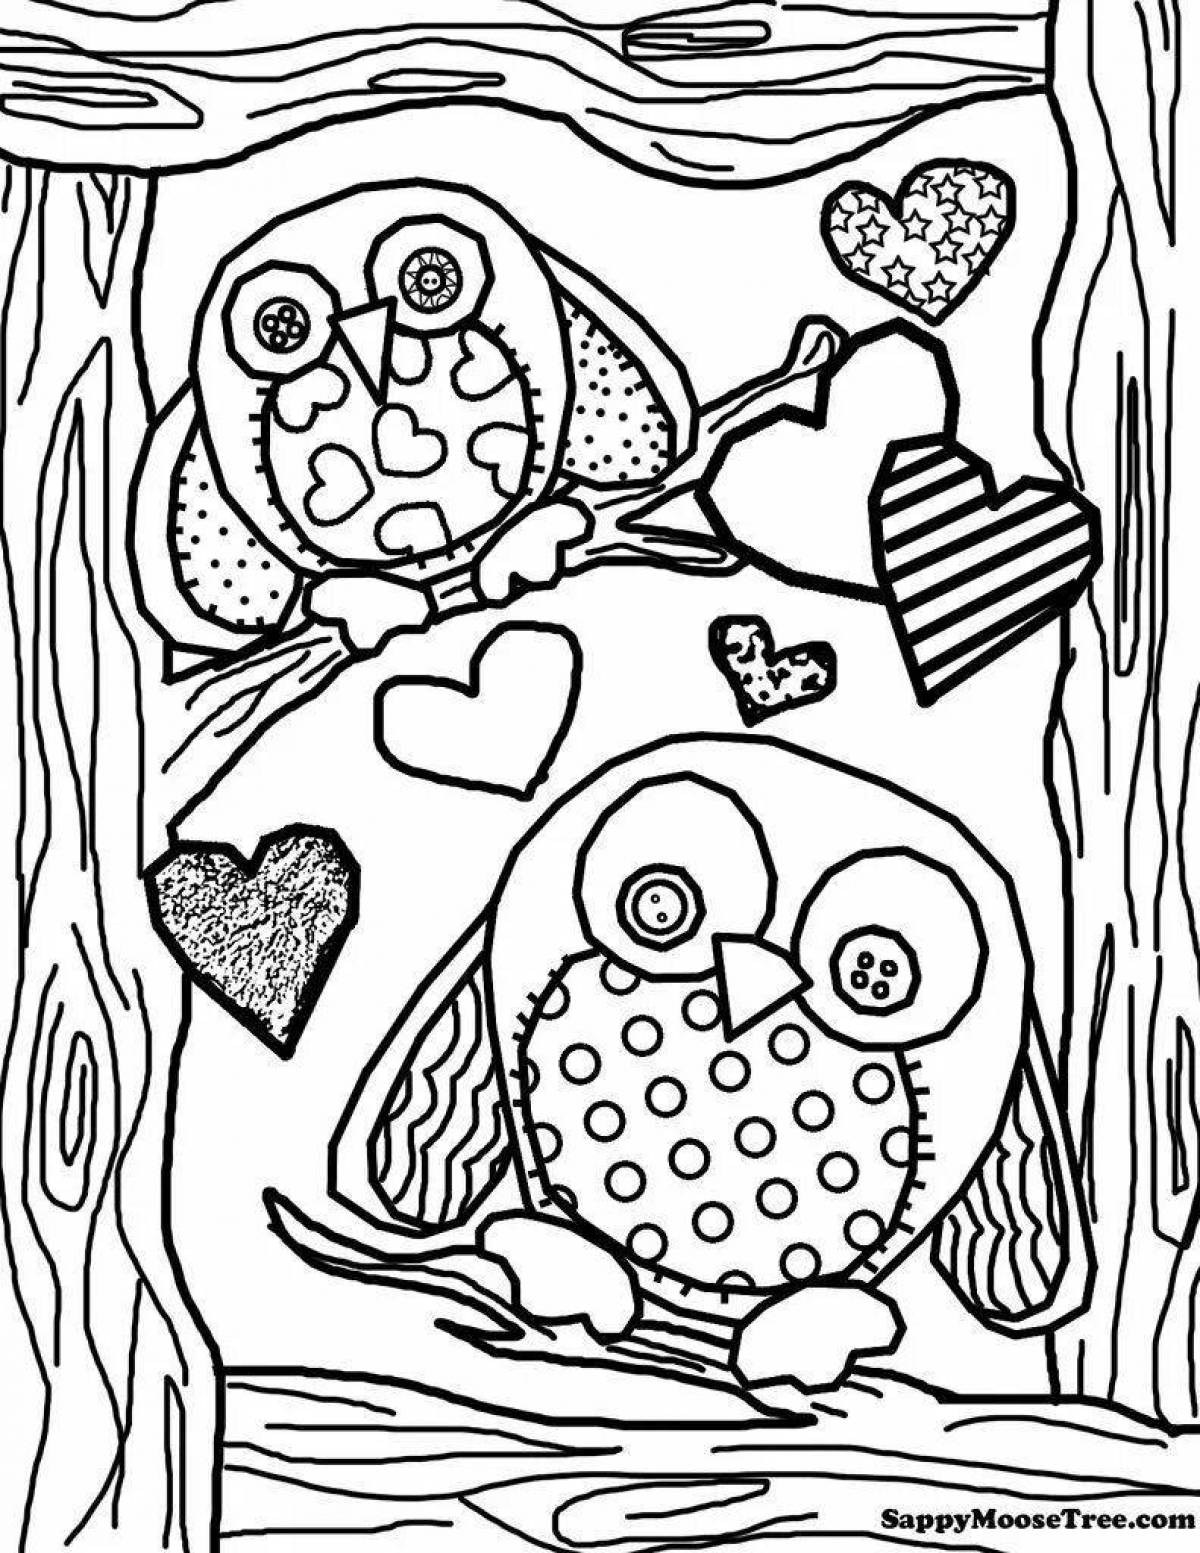 Exquisite owl coloring book for girls